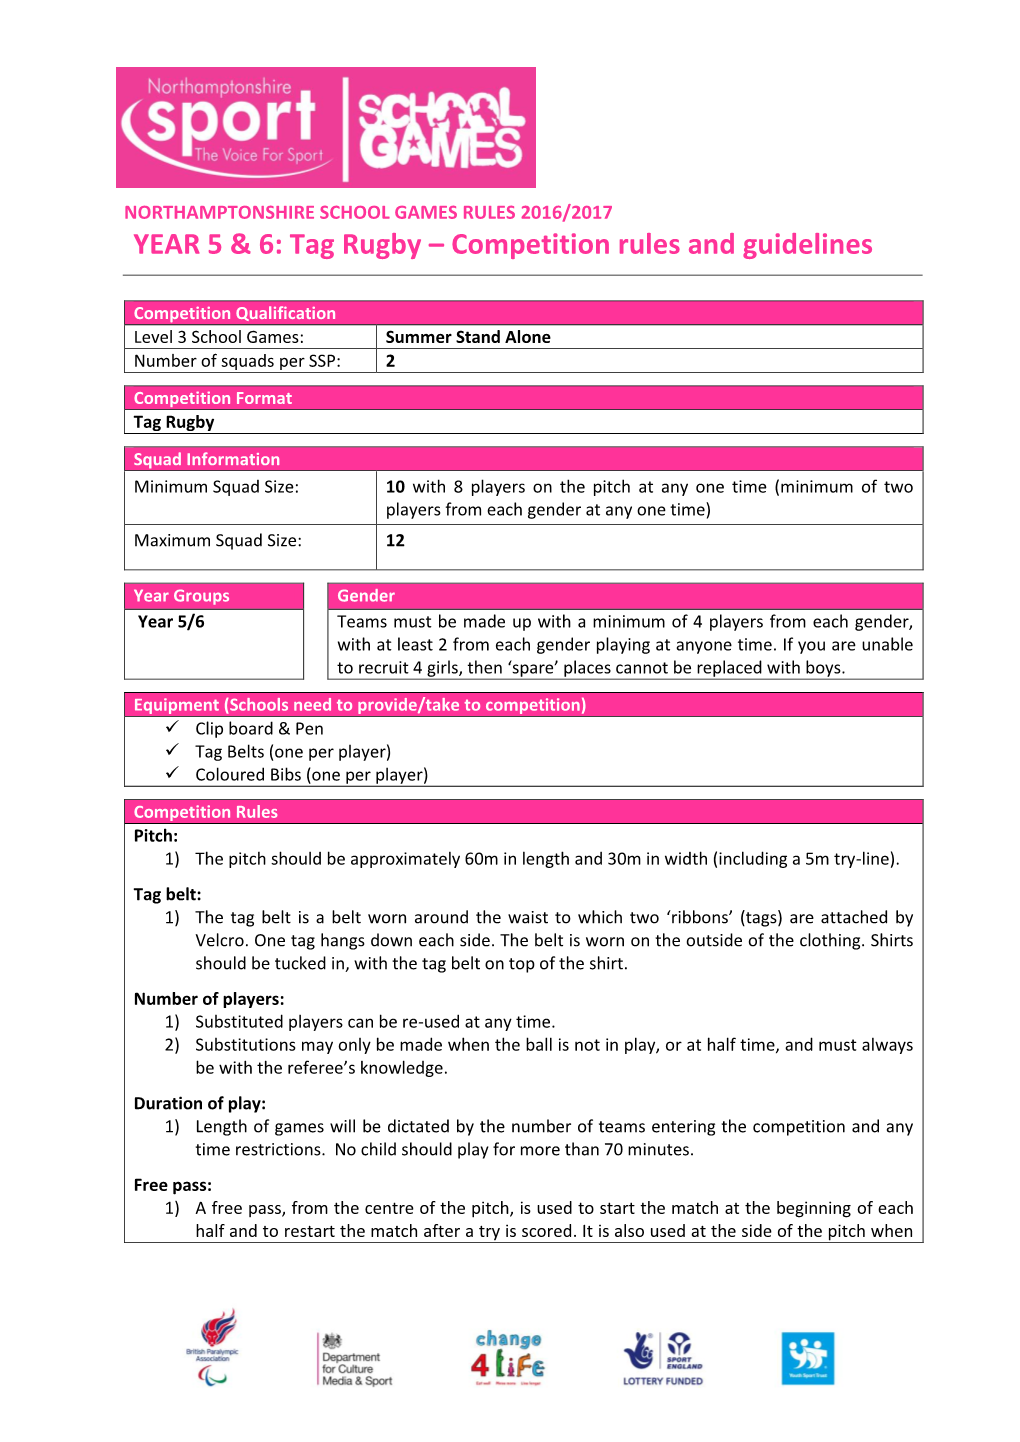 YEAR 5 & 6: Tag Rugby – Competition Rules and Guidelines